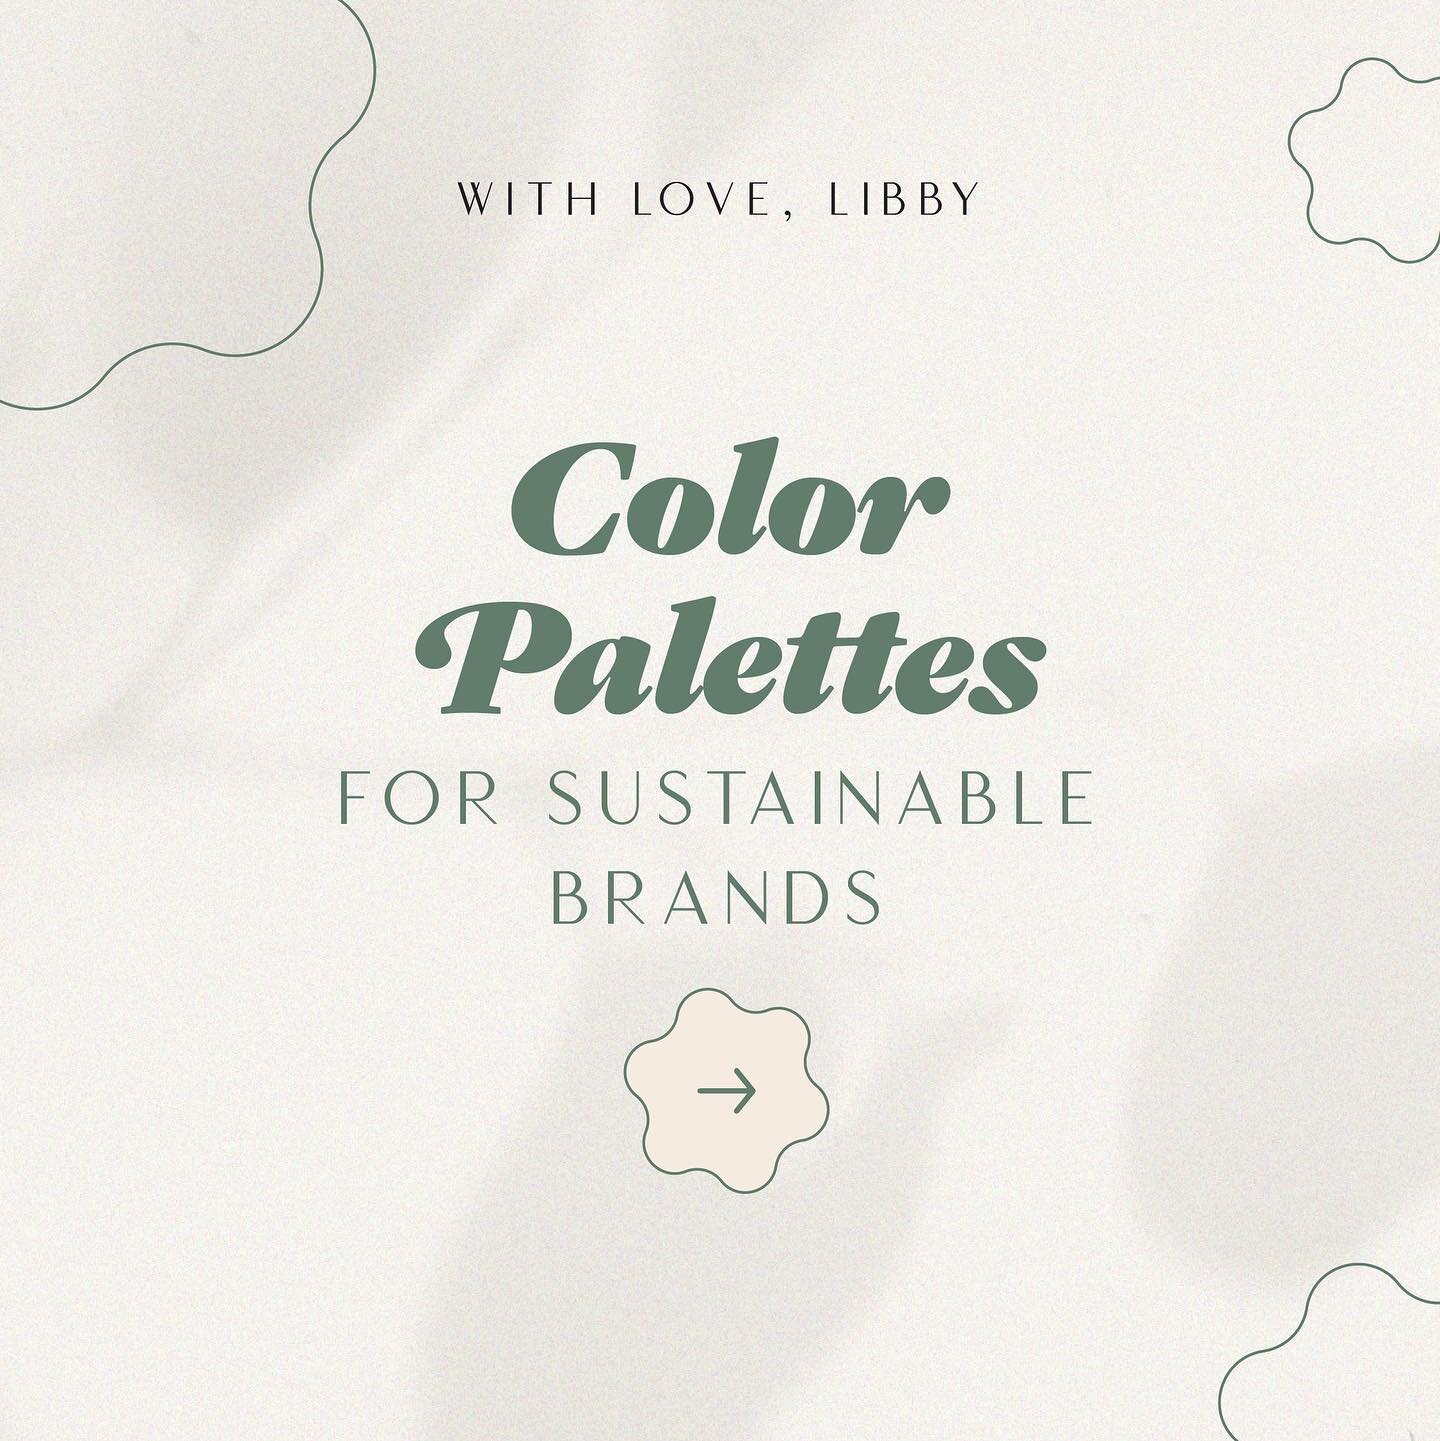 I&rsquo;ve been putting together color palettes for a sustainable brand recently, and i had to share a few. ♻️&nbsp;

Many eco-friendly/sustainable brands gravitate towards the color green for their branding, but it&rsquo;s important to create a cust